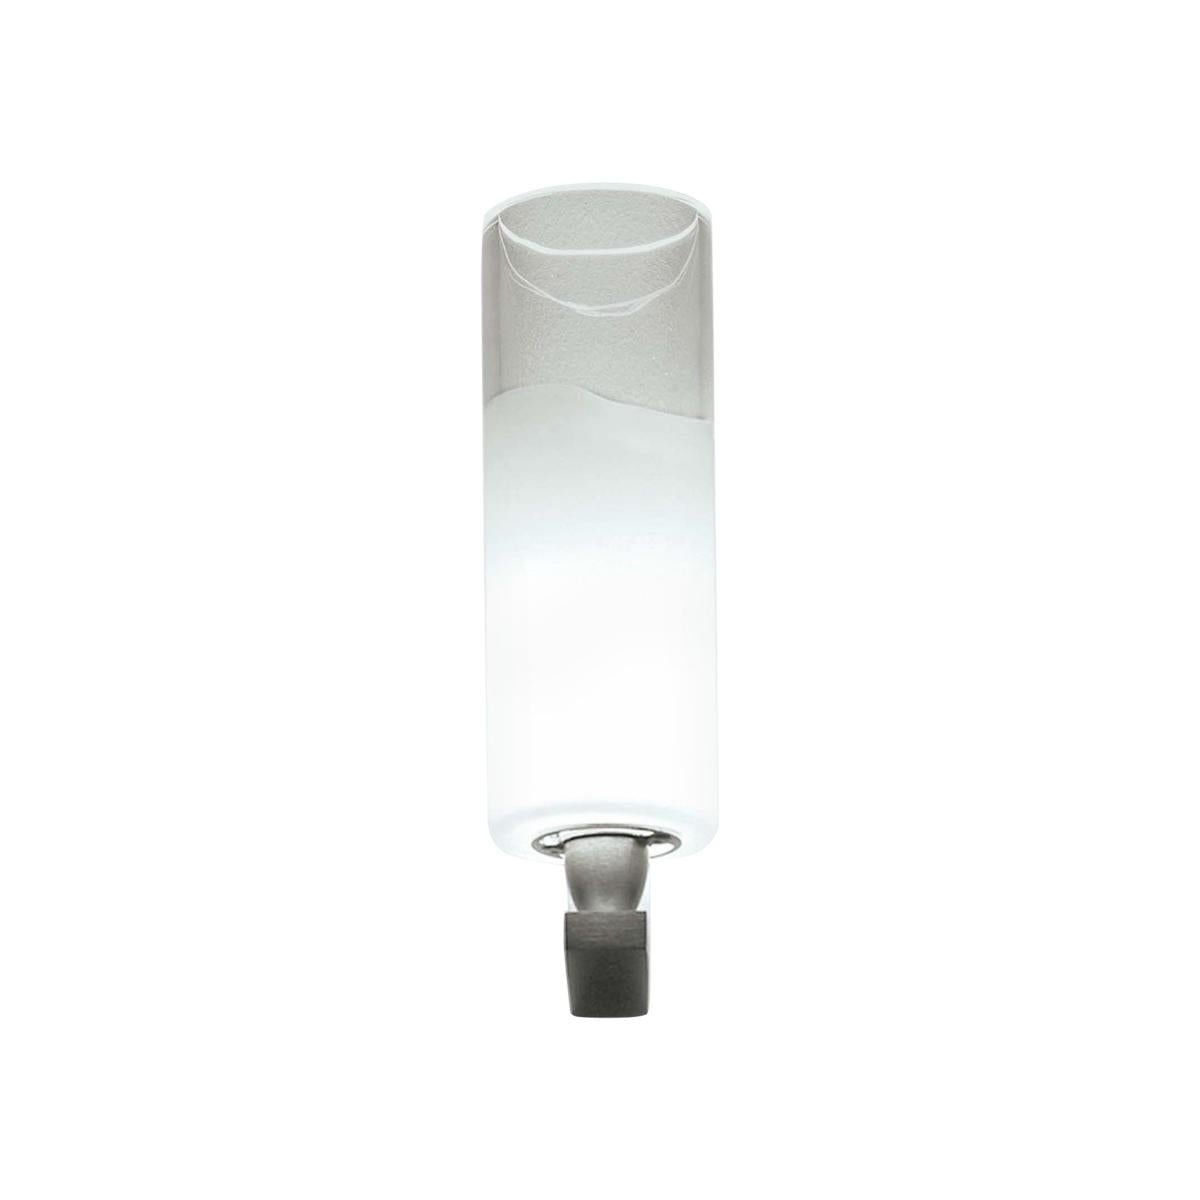 Lio AP L1 P Wall Light in Crystal White by Vistosi